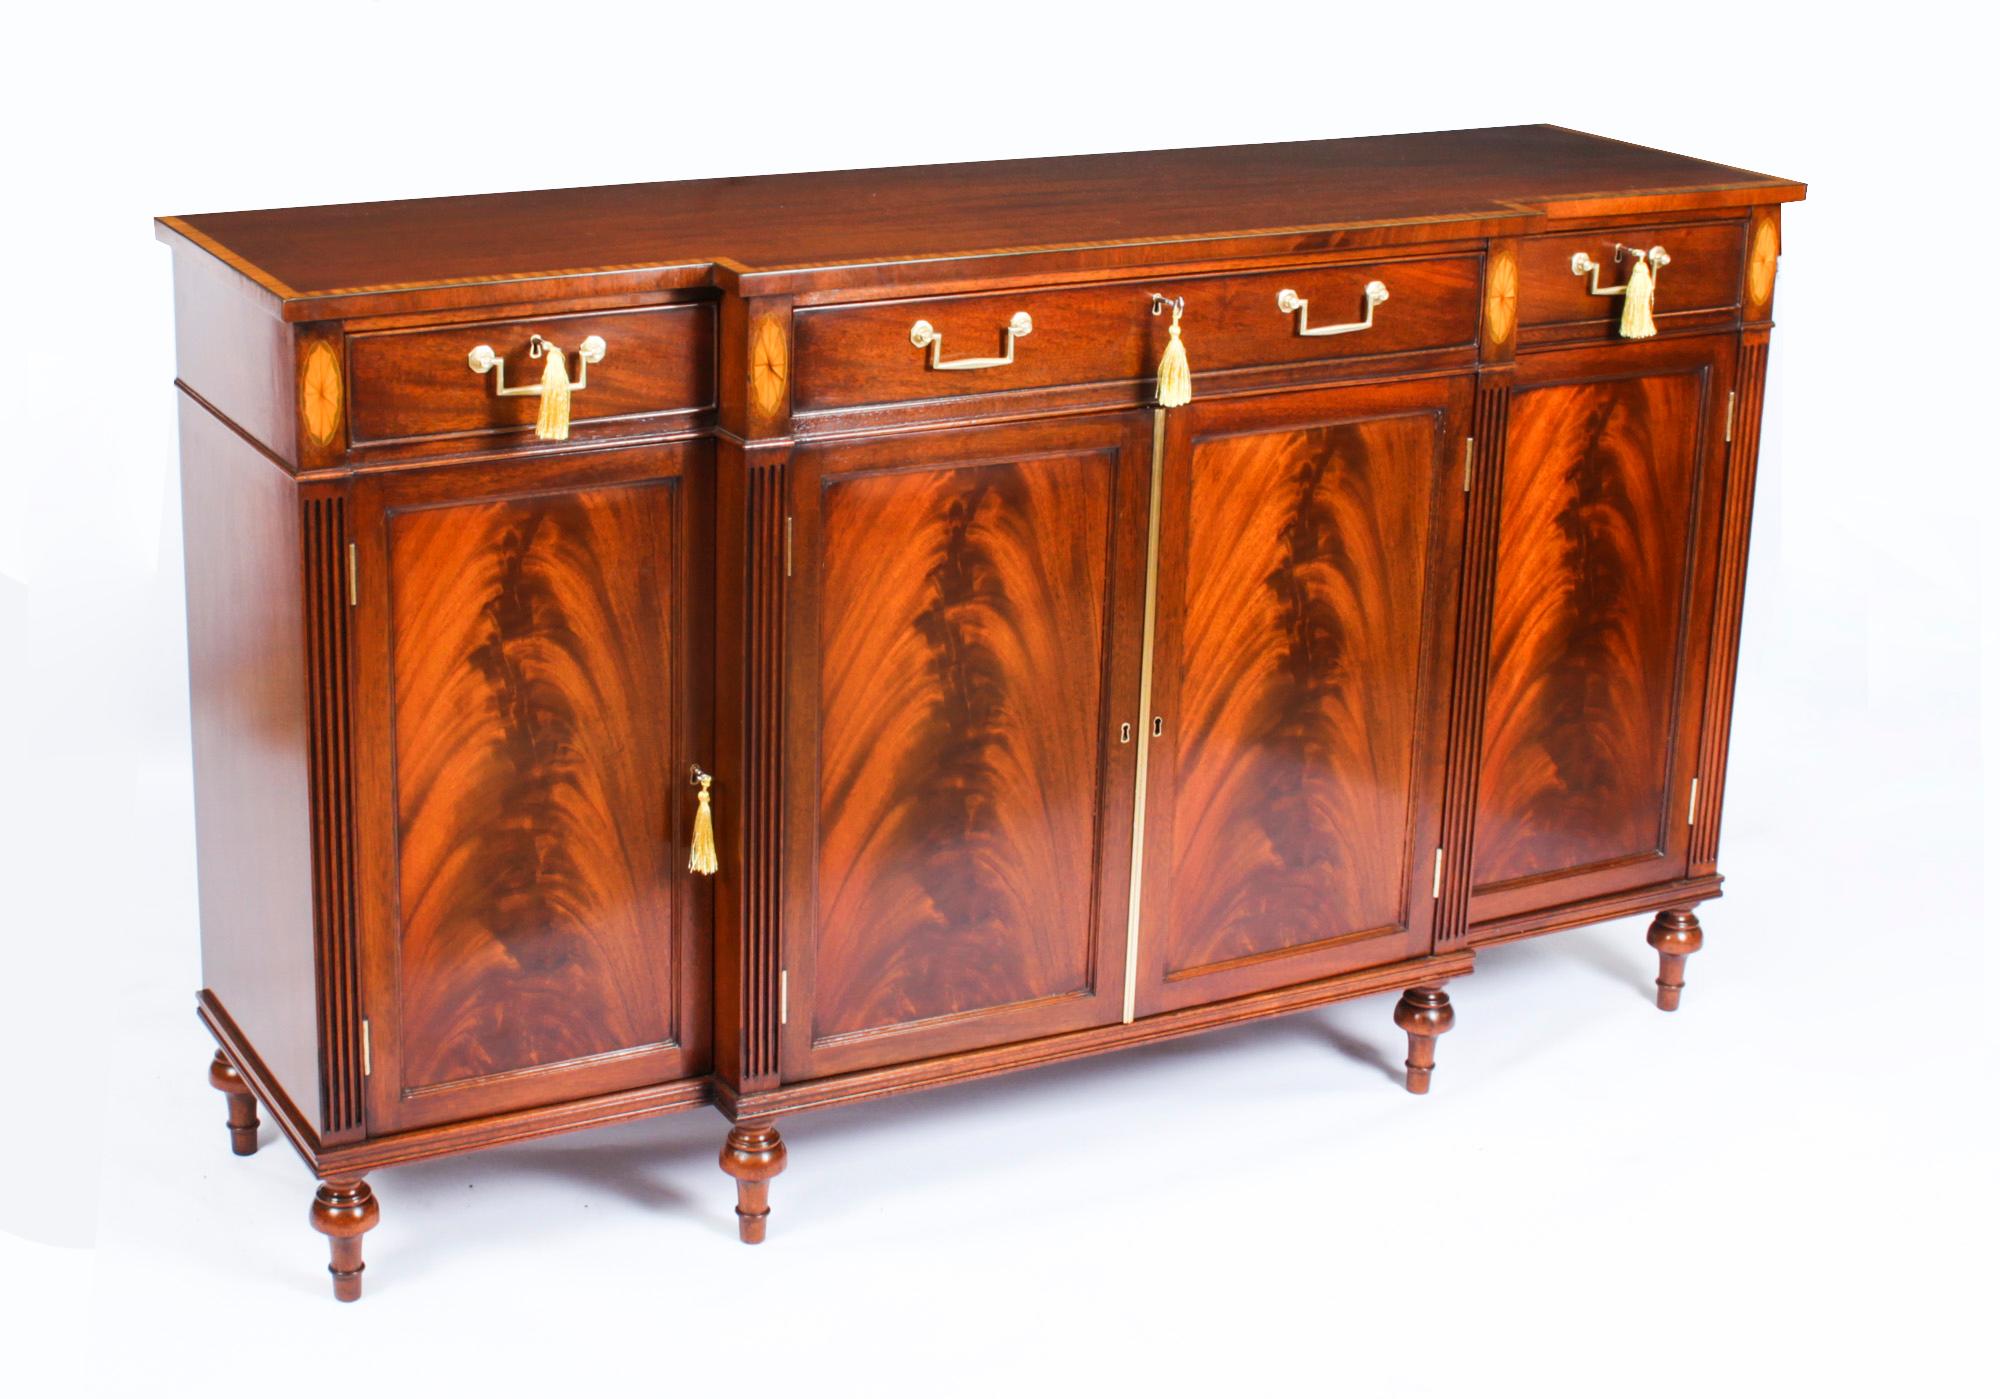 This is a fabulous pair of vintage Regency Revival breakfront sideboards by the master cabinet maker William Tillman, Circa 1980 in date.

They are made of stunning flame mahogany crossbanded in satinwood, fitted with drawers and cupboards and